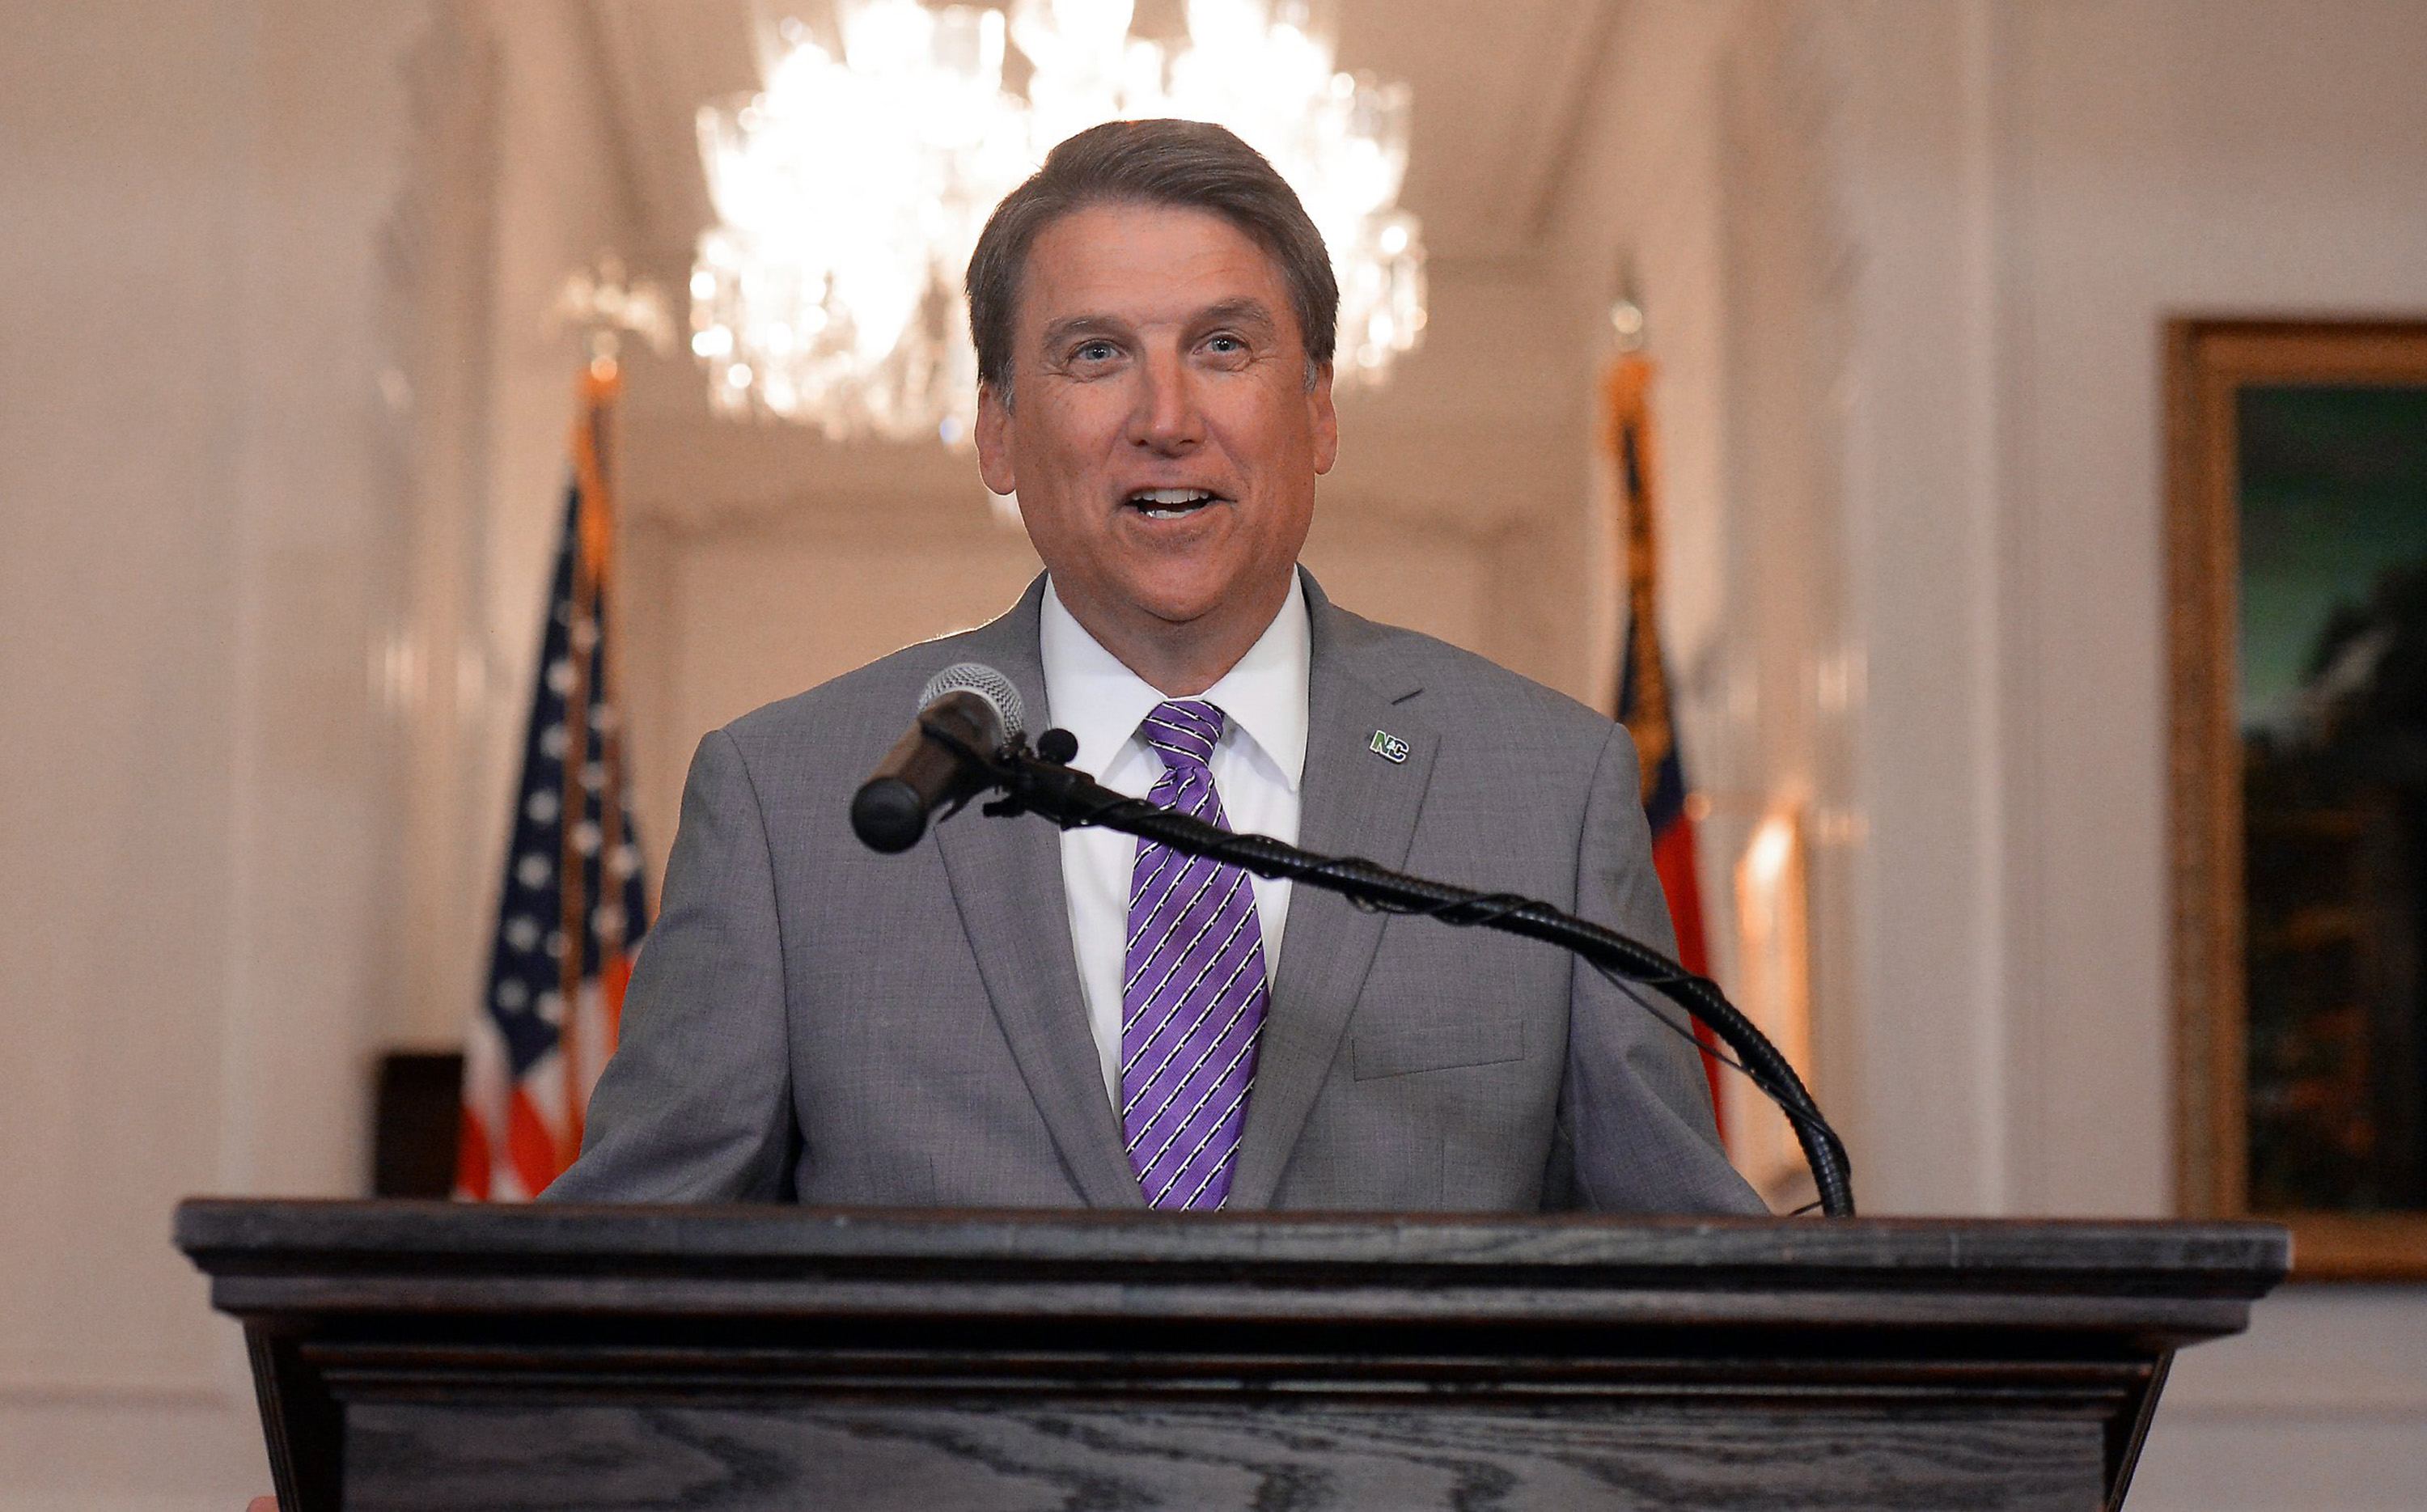 N.C. Gov. Pat McCrory speaks to the media Monday, May 9, 2016. (Chuck Liddy—Raleigh News &amp; Observer/Getty Images)